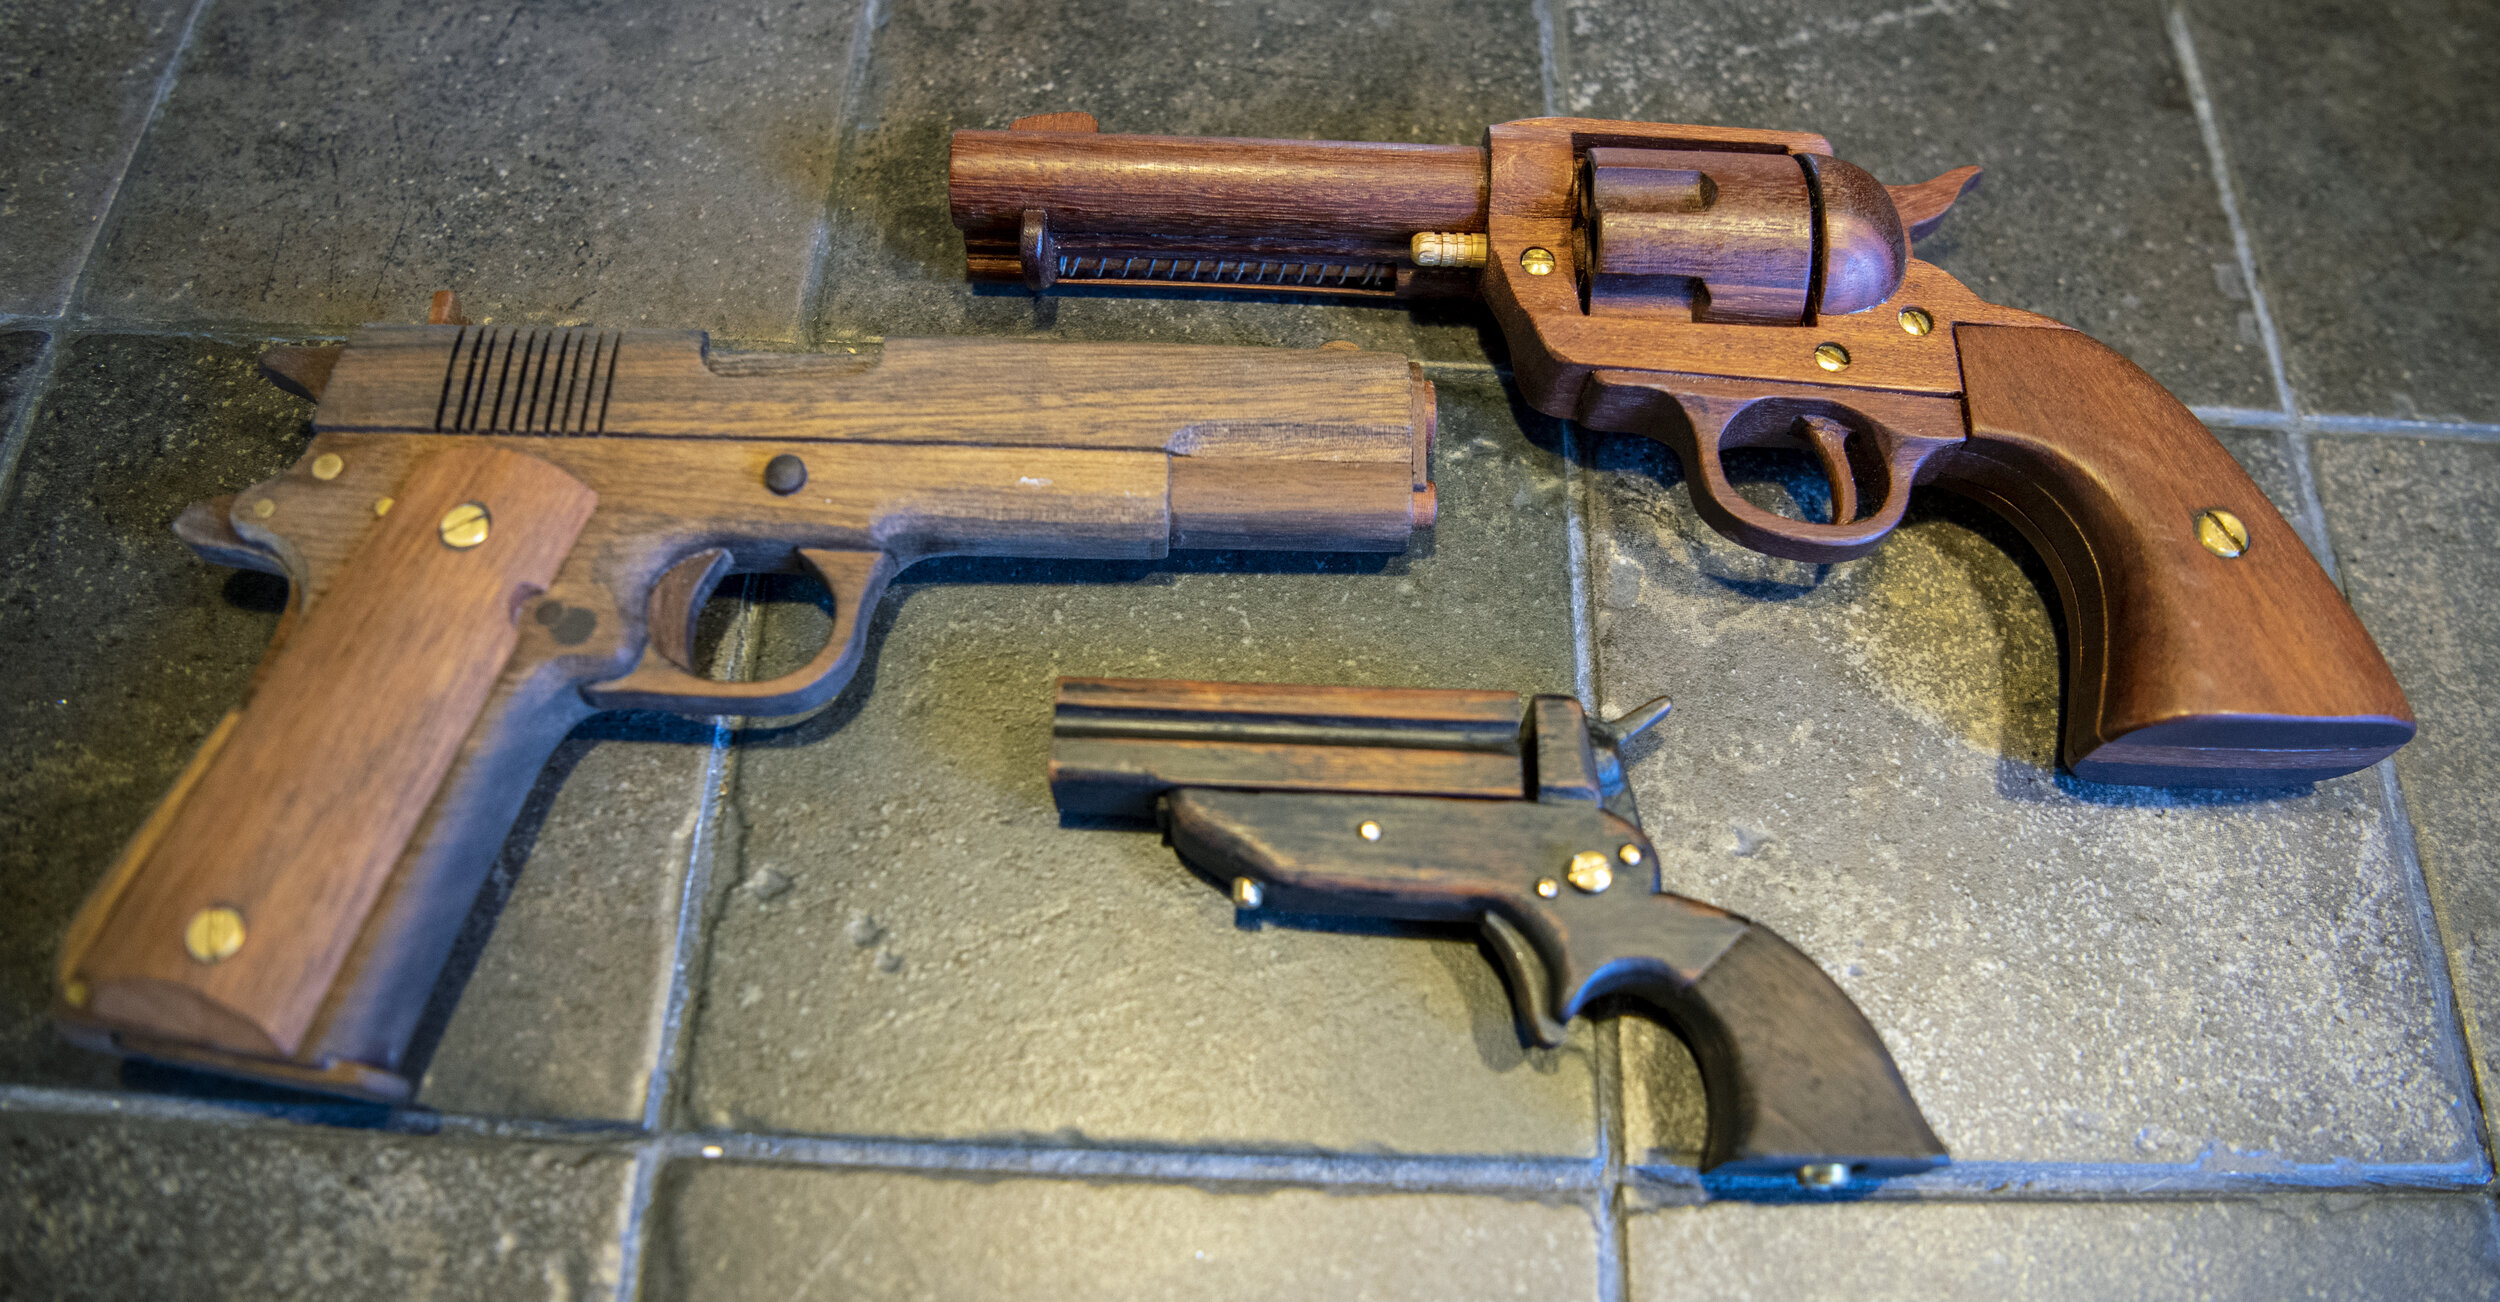 ALL WOOD PISTOL REPRODUCTIONS